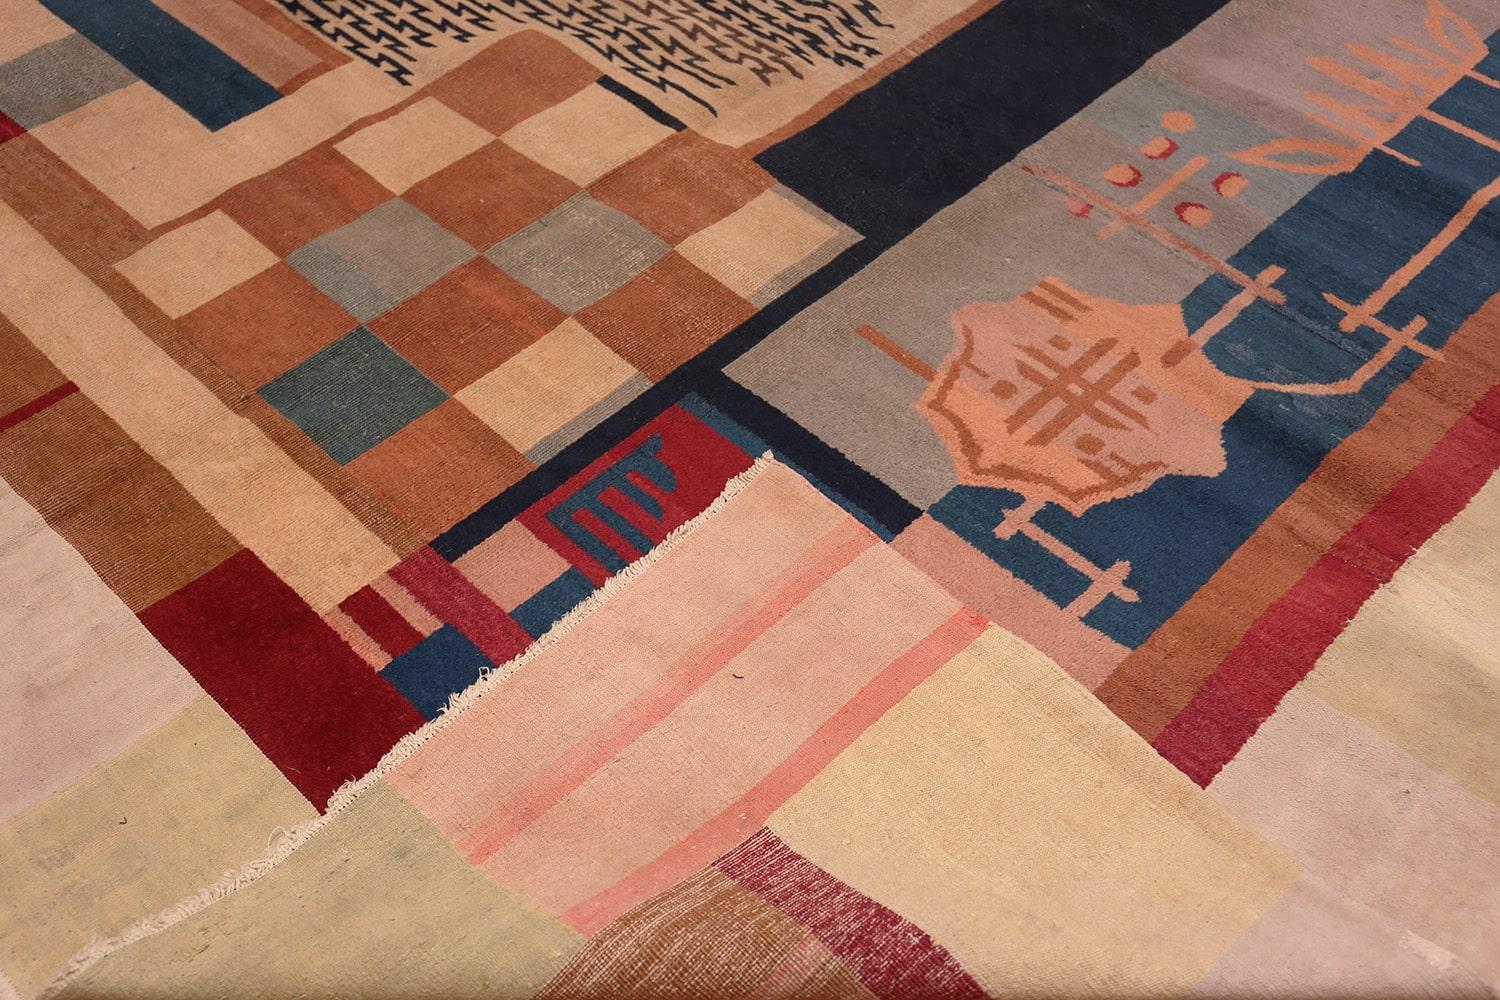 Vintage Art Deco Rug, Country Of Origin: India, Circa date: Early 20th century. Size: 12 ft 7 in x 18 ft 7 in (3.84 m x 5.66 m)

